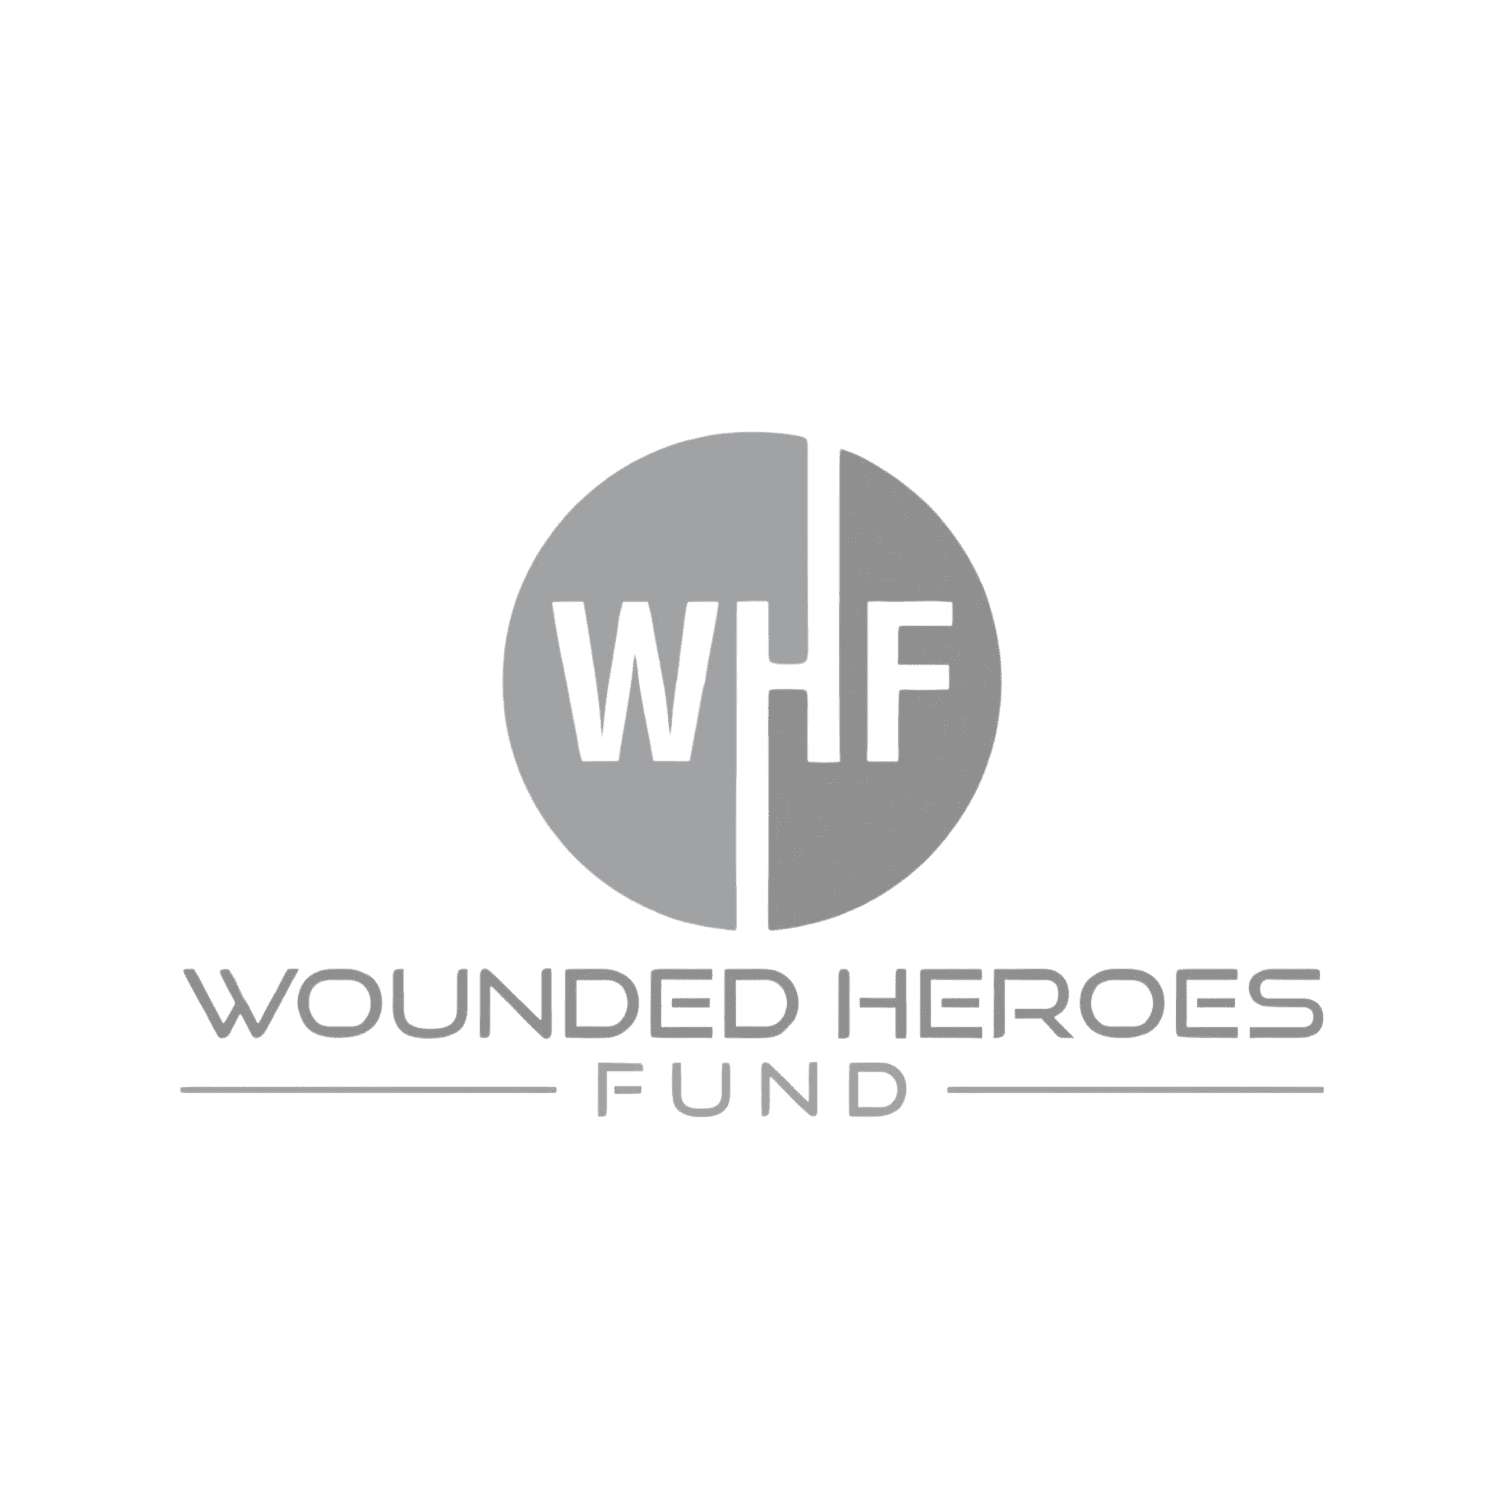 Wounded Heroes Fund Logo